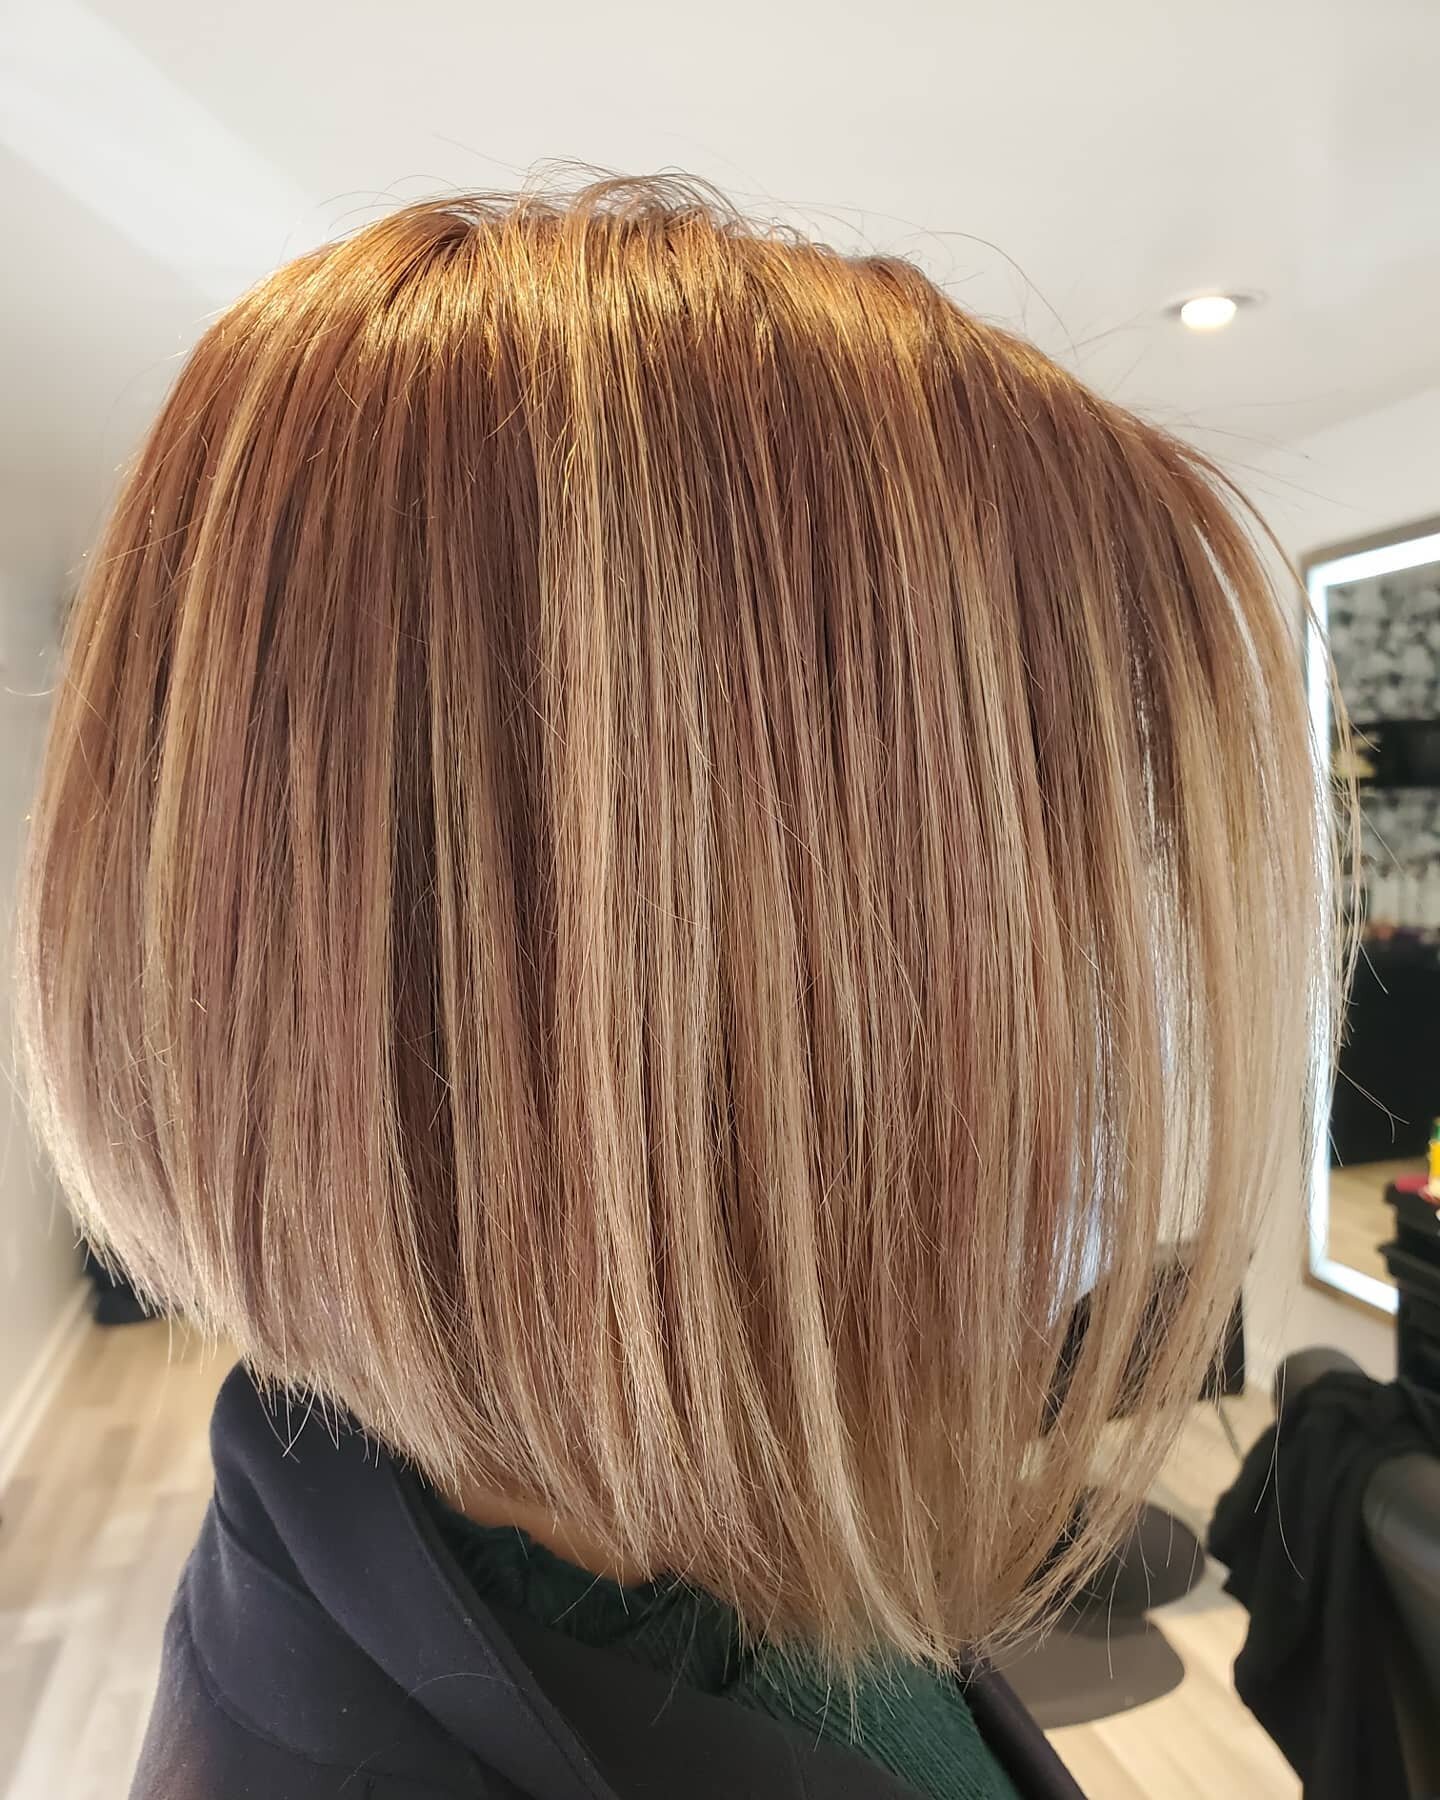 It's winter baby! Bringing you sexy winter #bronde #balayage. Swipe for before.